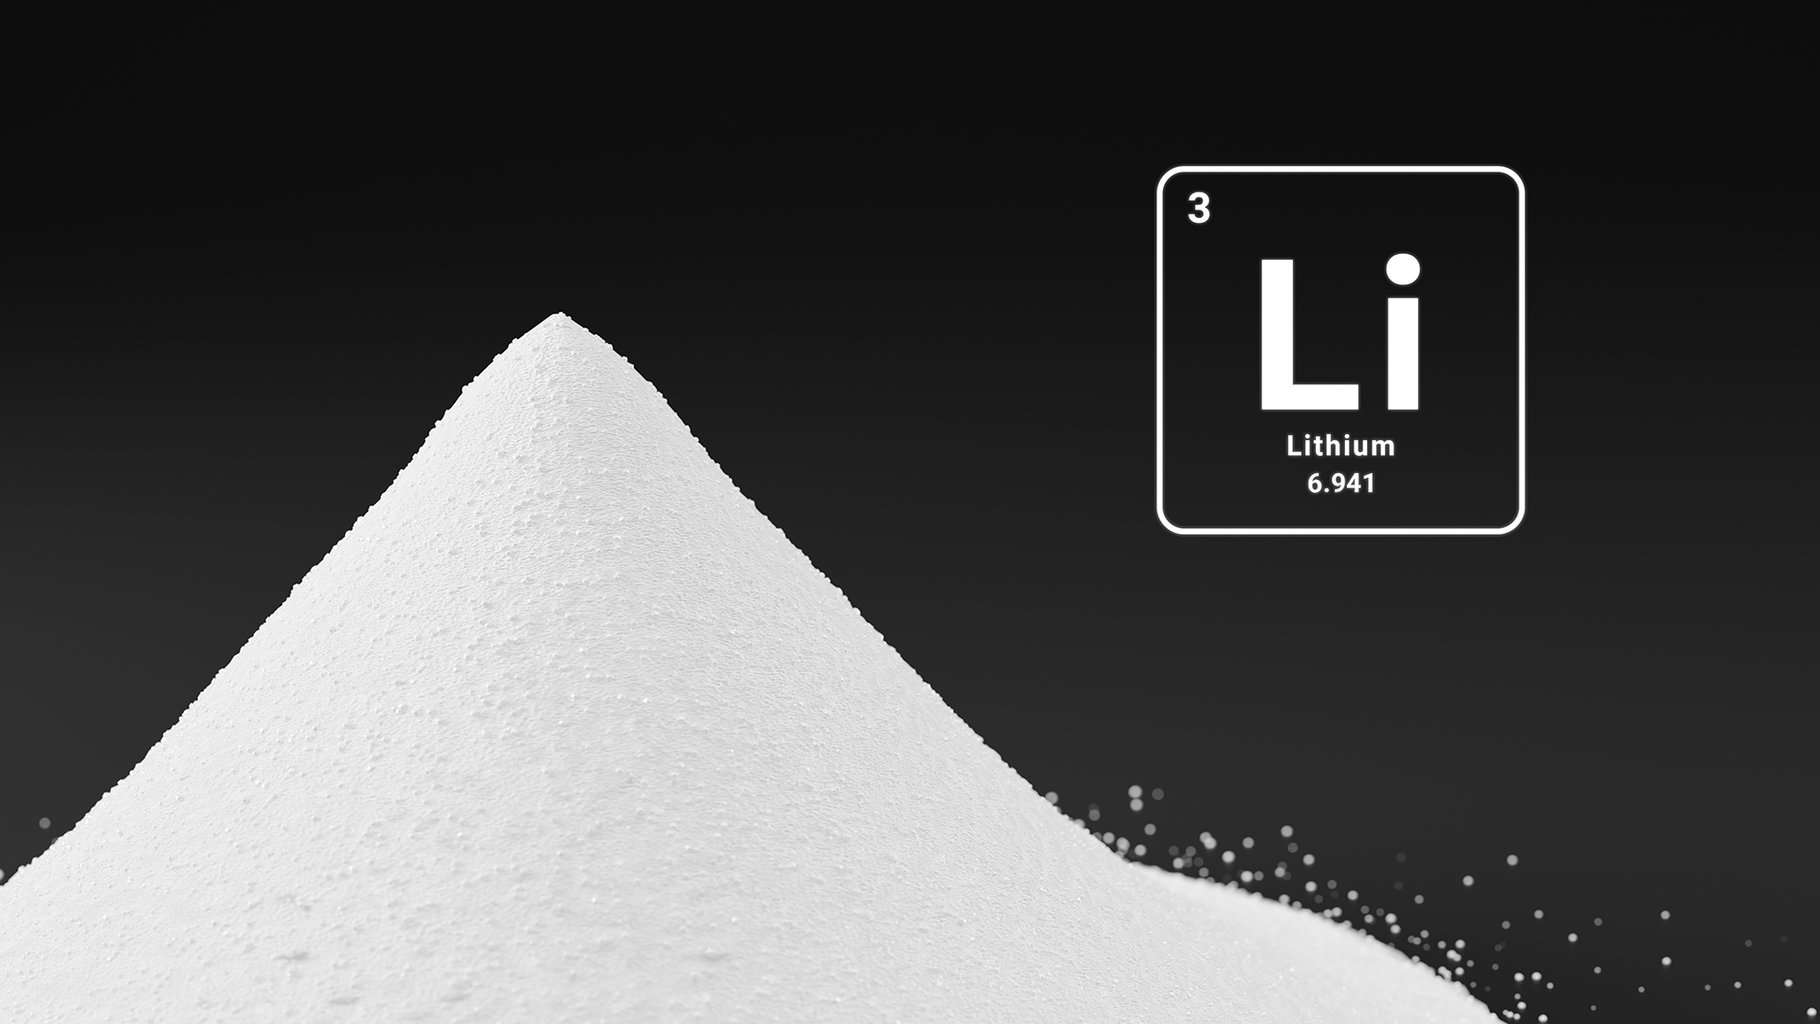 International Lithium Association (ILiA) Lithium product carbon footprint (PCF) guidance Sustainability in lithium industry Greenhouse gas (GHG) emissions Industry collaboration